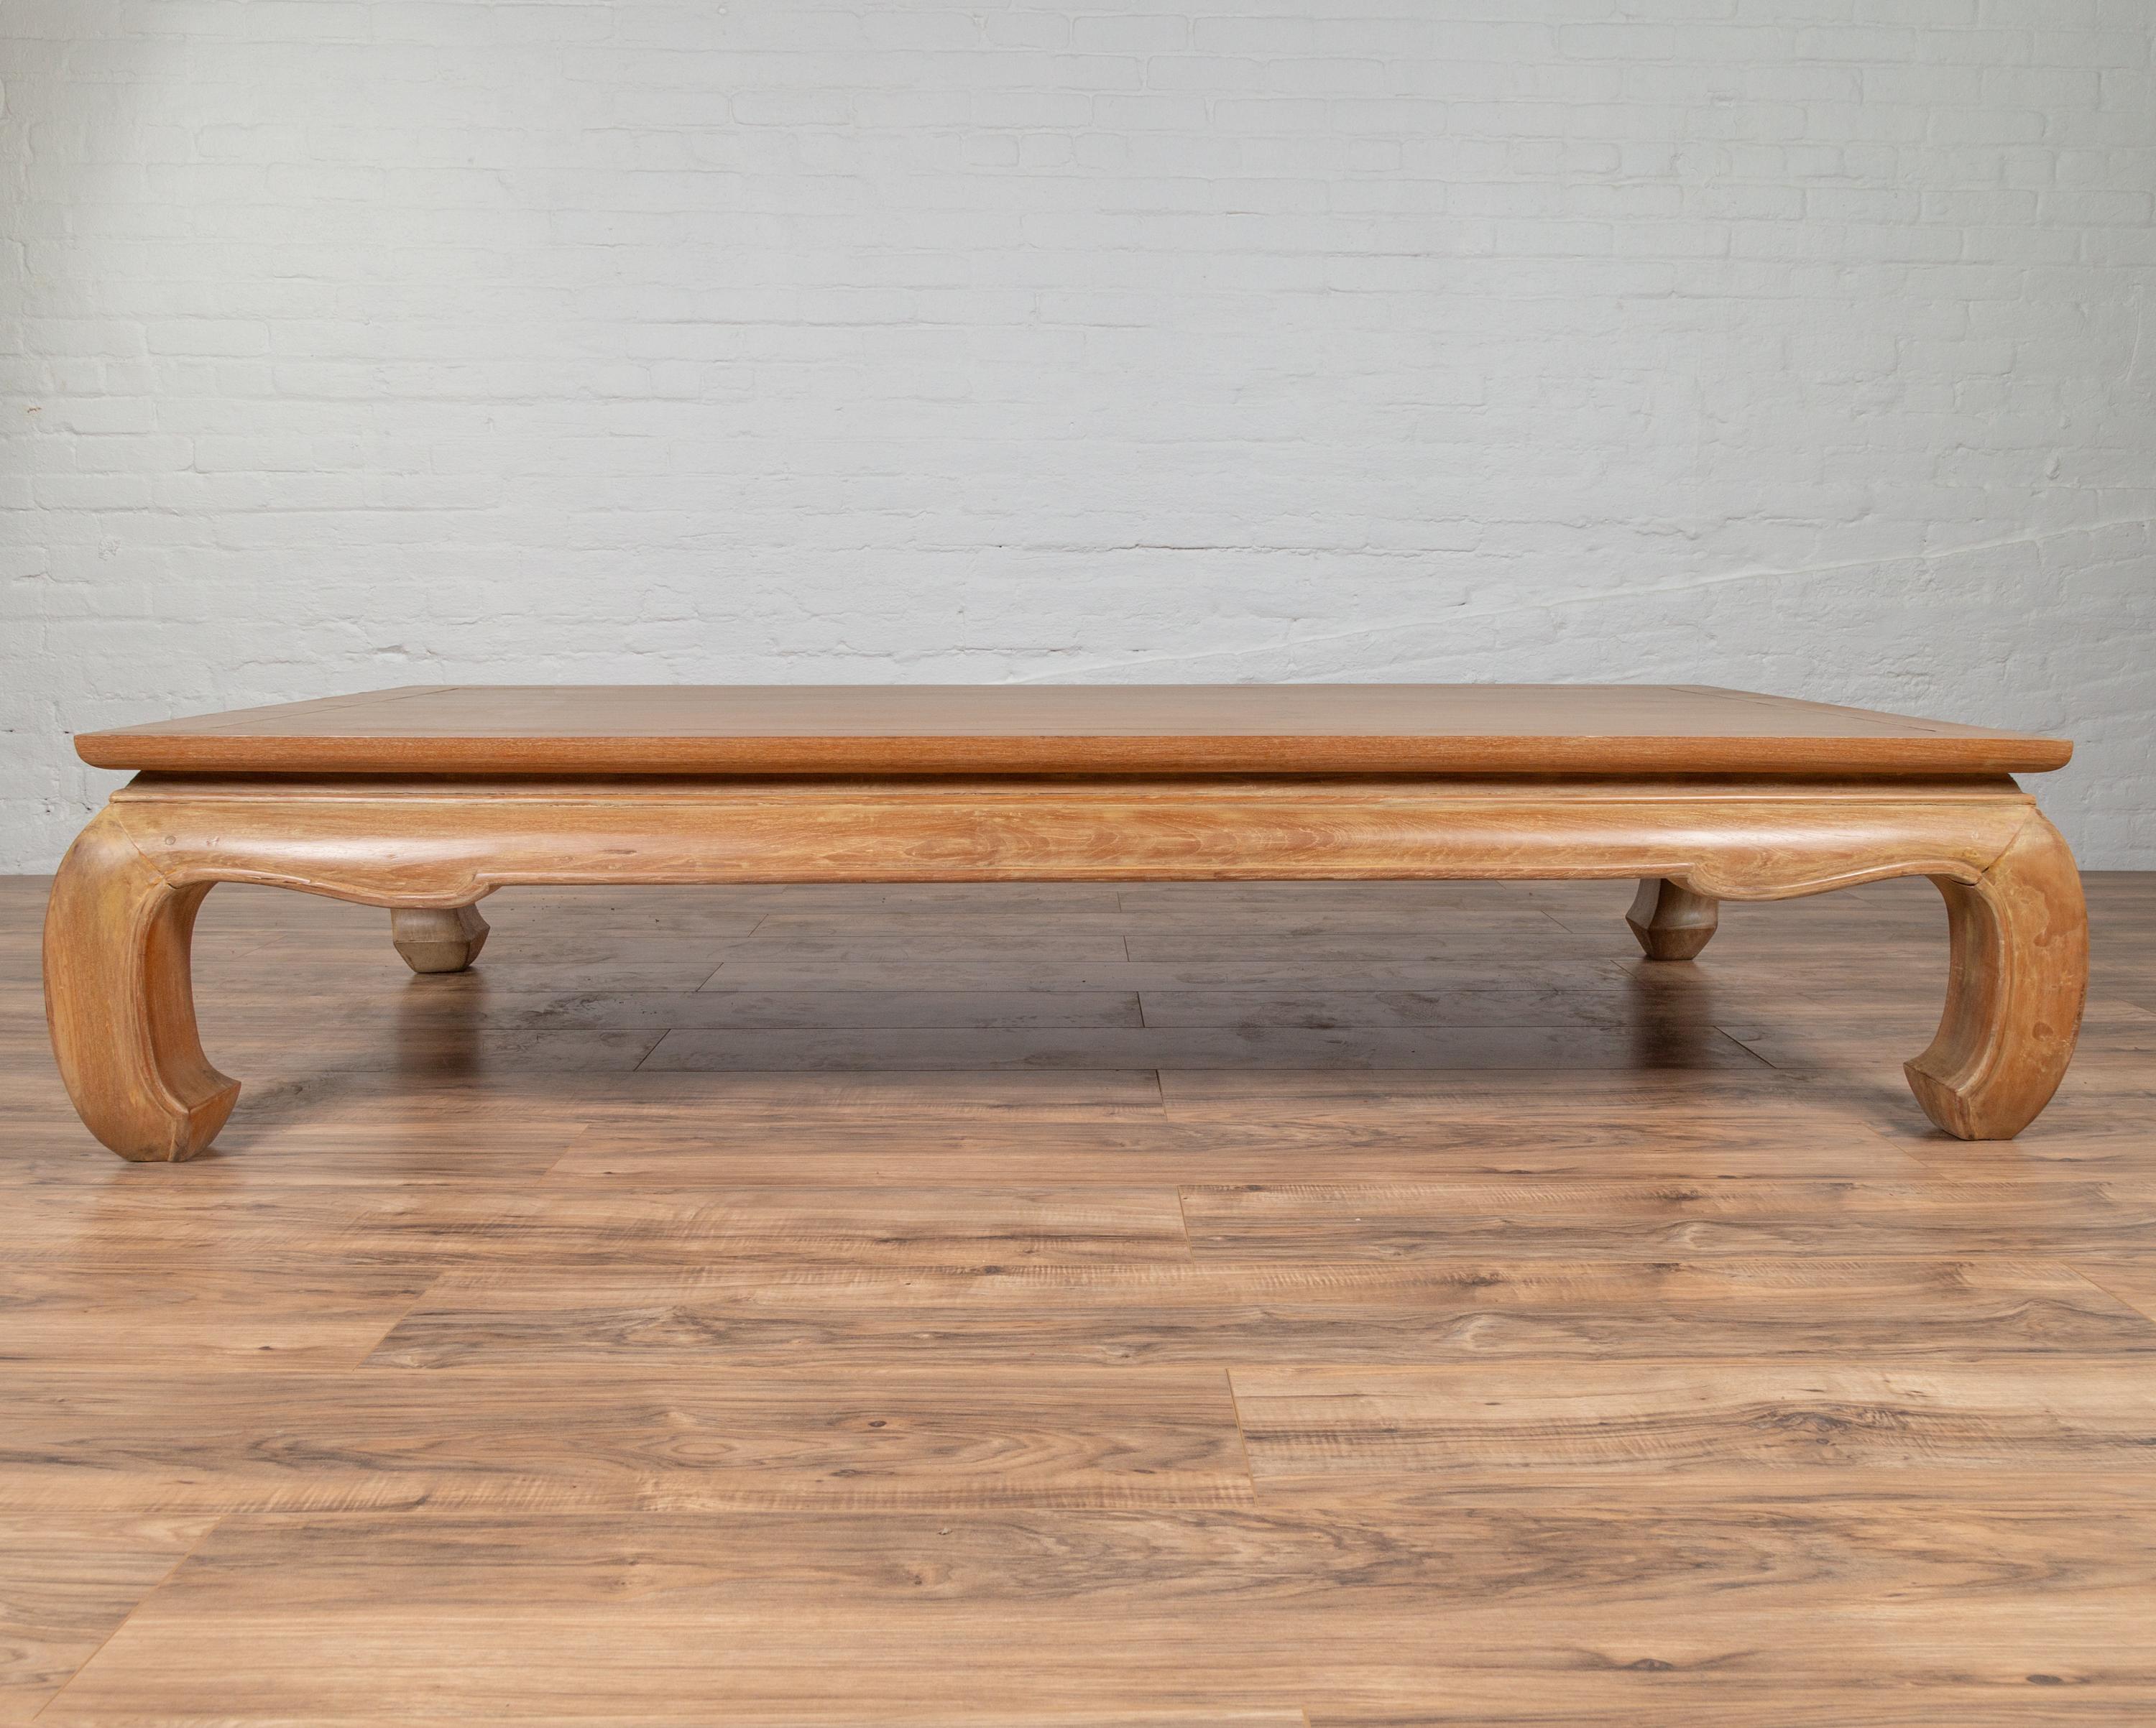 A large Thai vintage Chinese Ming Dynasty style teak wood coffee table from the mid 20th century, with natural patina and bulging chow legs. We currently have three available, priced and sold individually. Born in Thailand during the mid-century